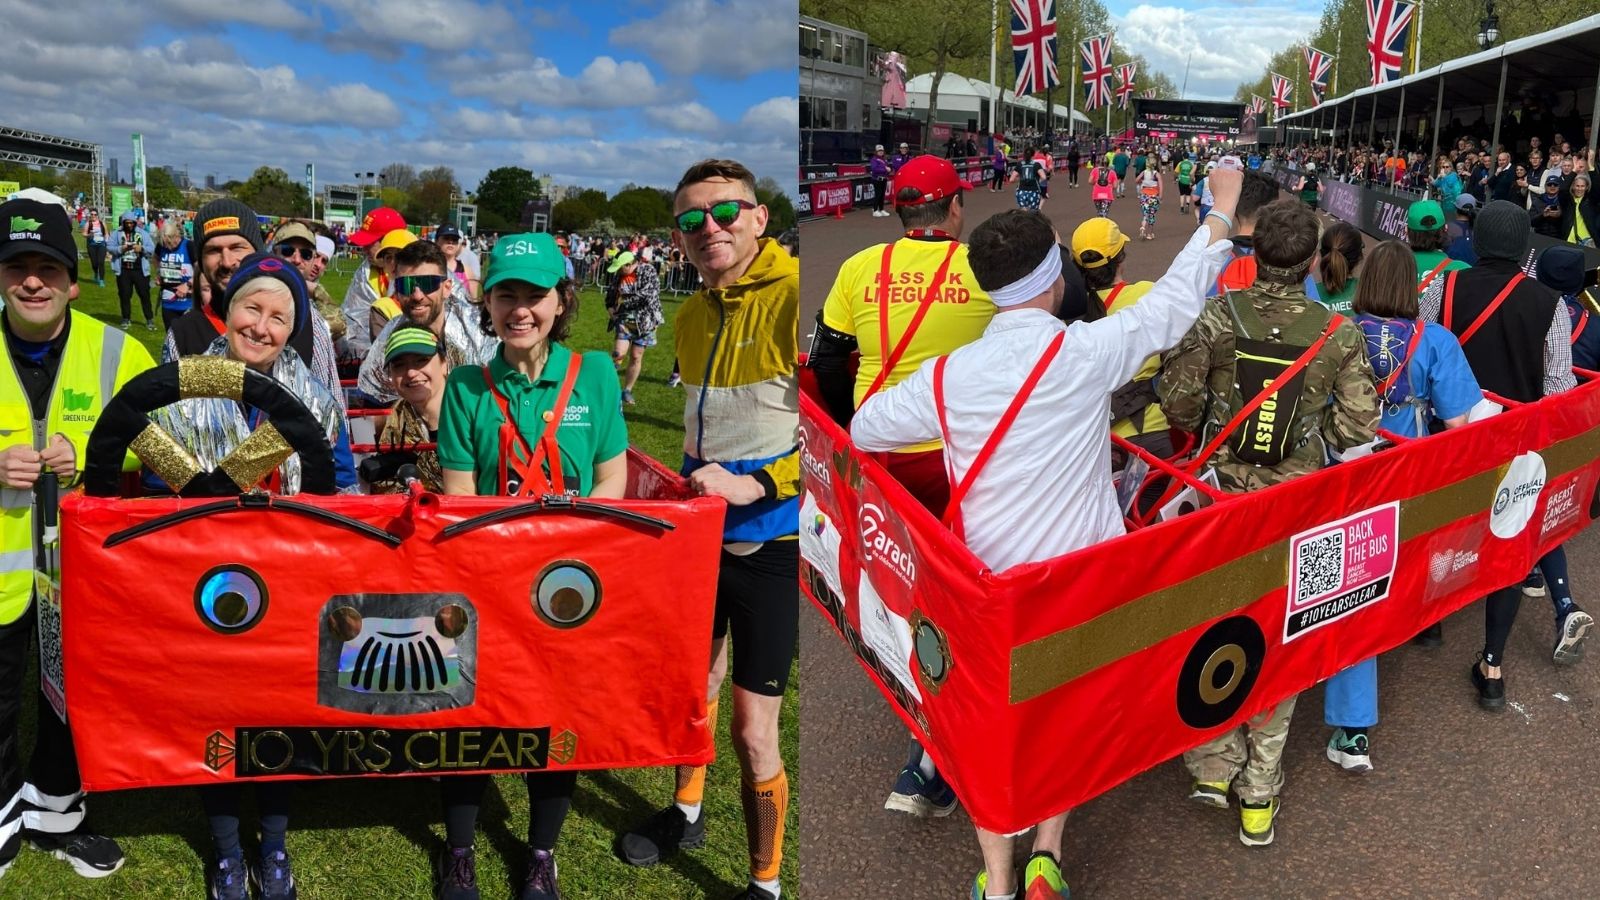 A group of people dressed as a London bus running the London Marathon